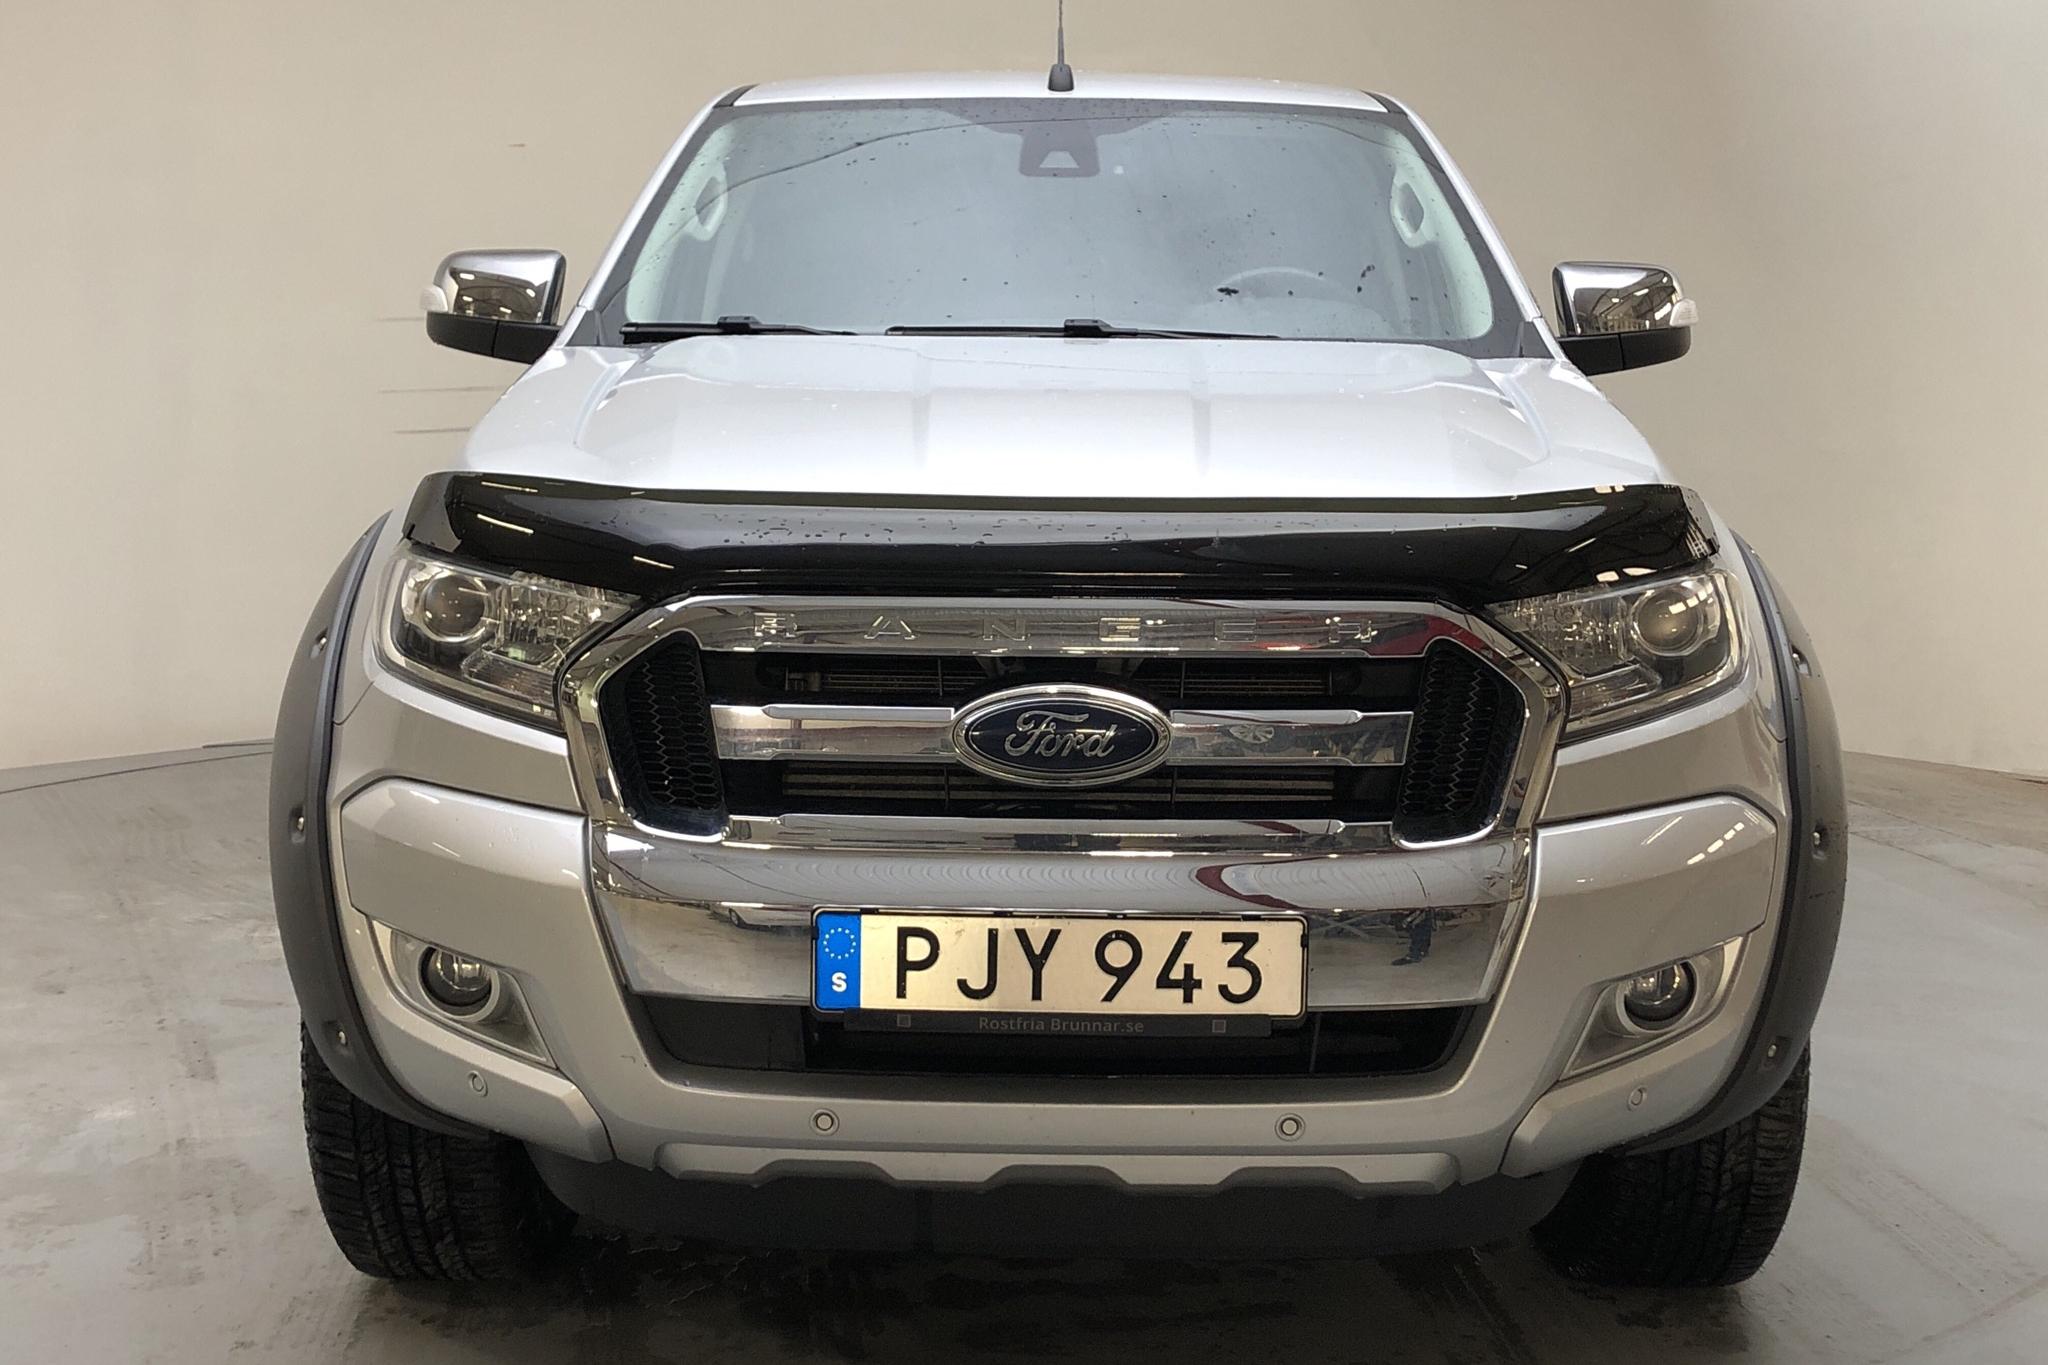 Ford Ranger 3.2 TDCi 4WD (200hk) - 135 490 km - Automatic - gray - 2017